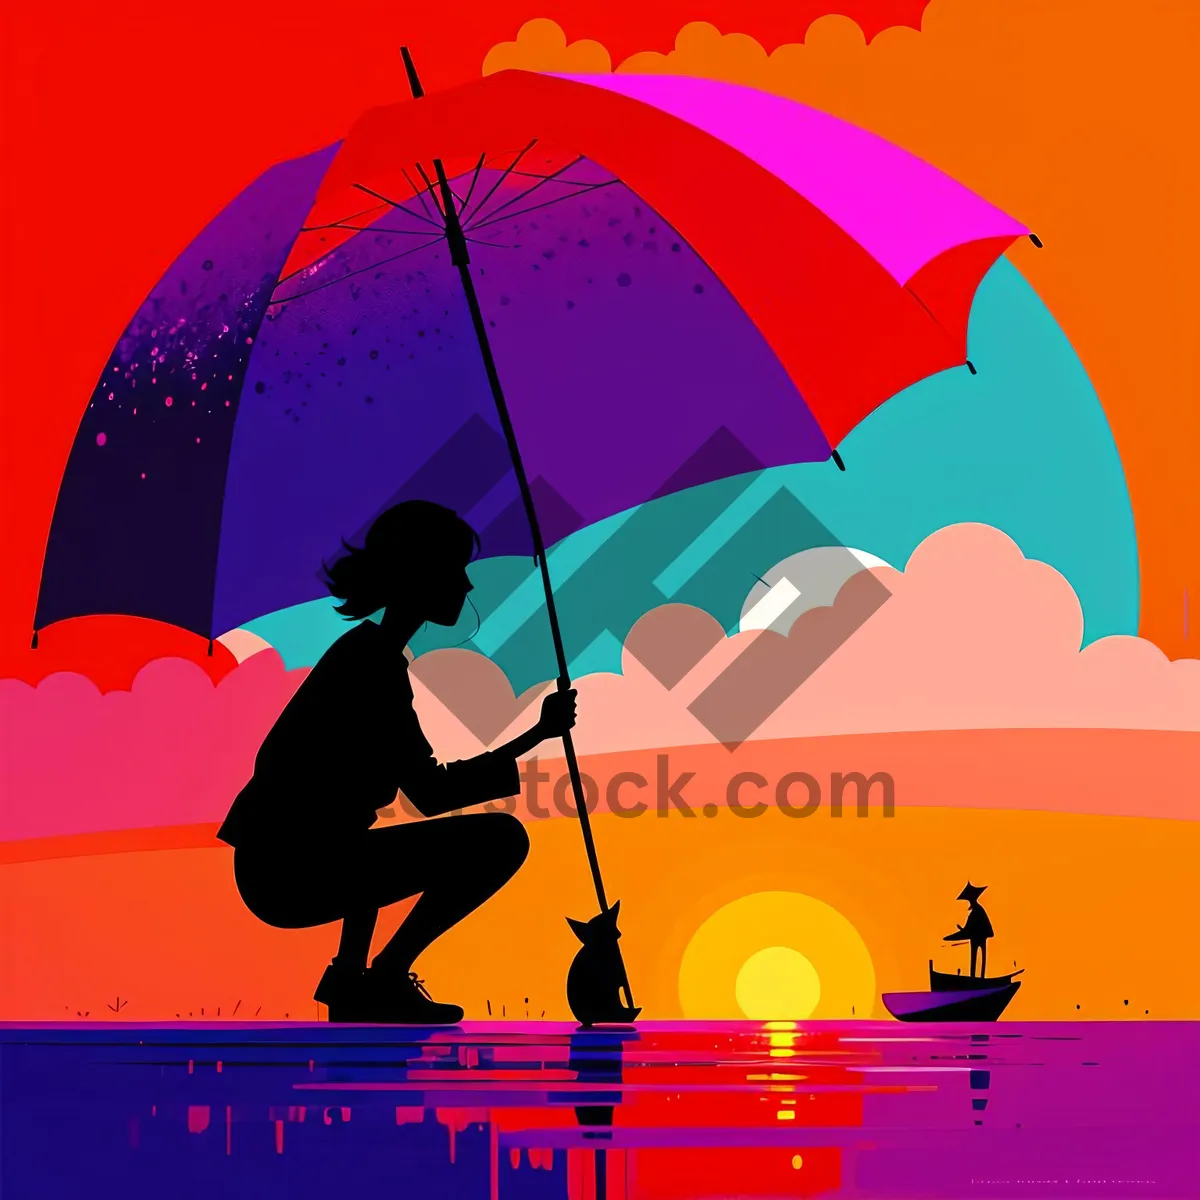 Picture of Silhouette of Fisherman under Umbrella: Sporty Shelter